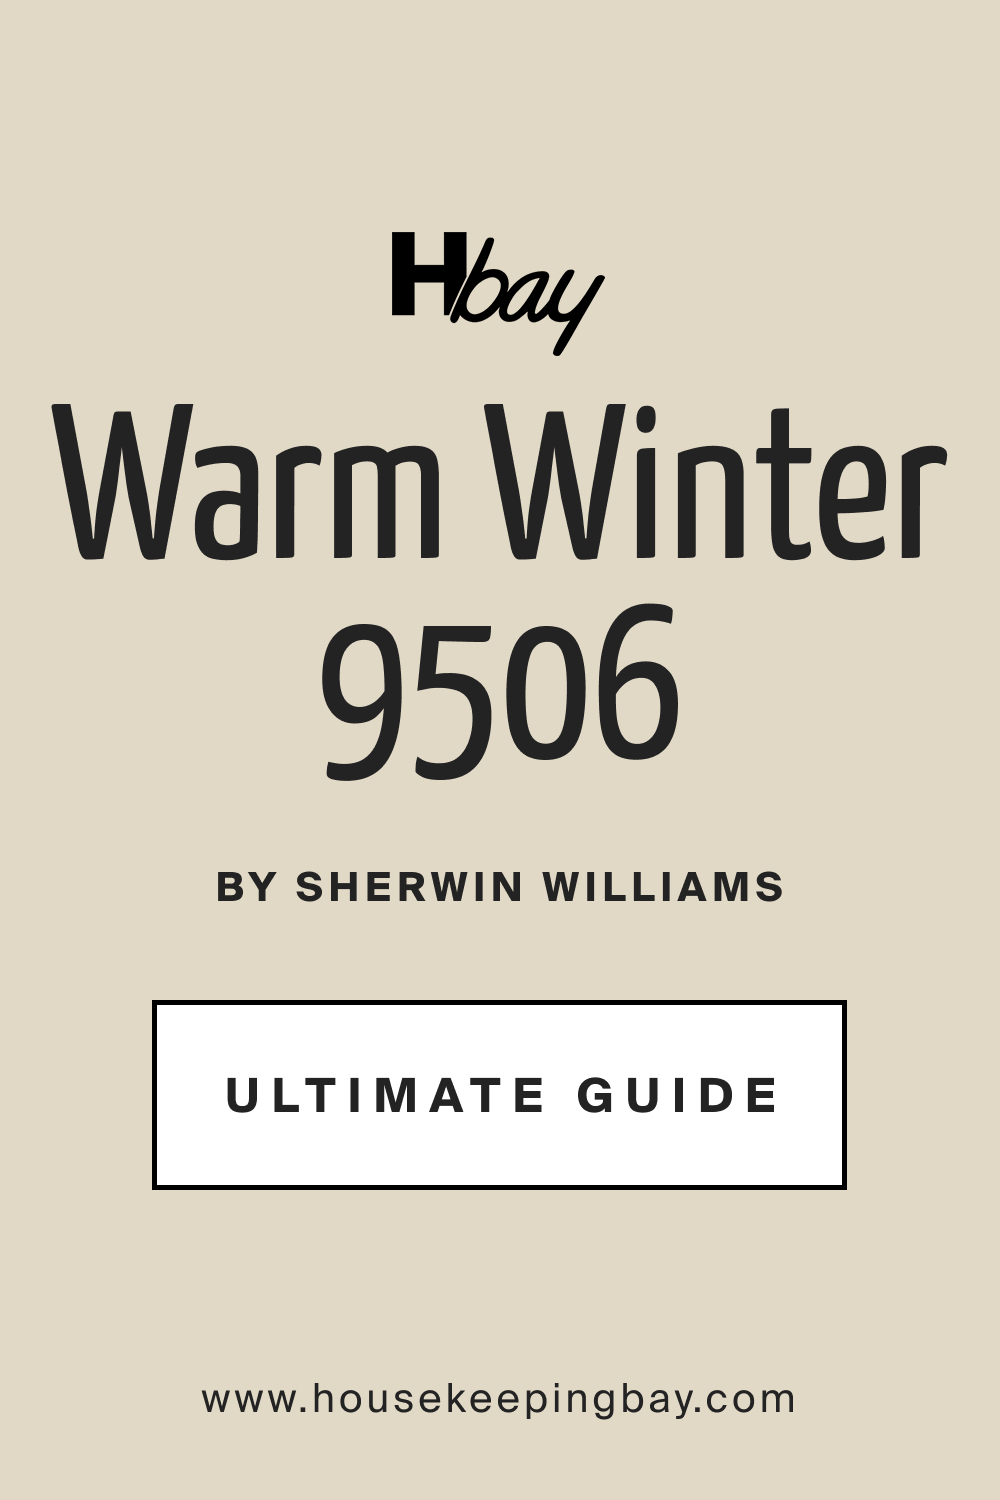 SW 9506 Warm Winter by Sherwin Williams Ultimate Guide